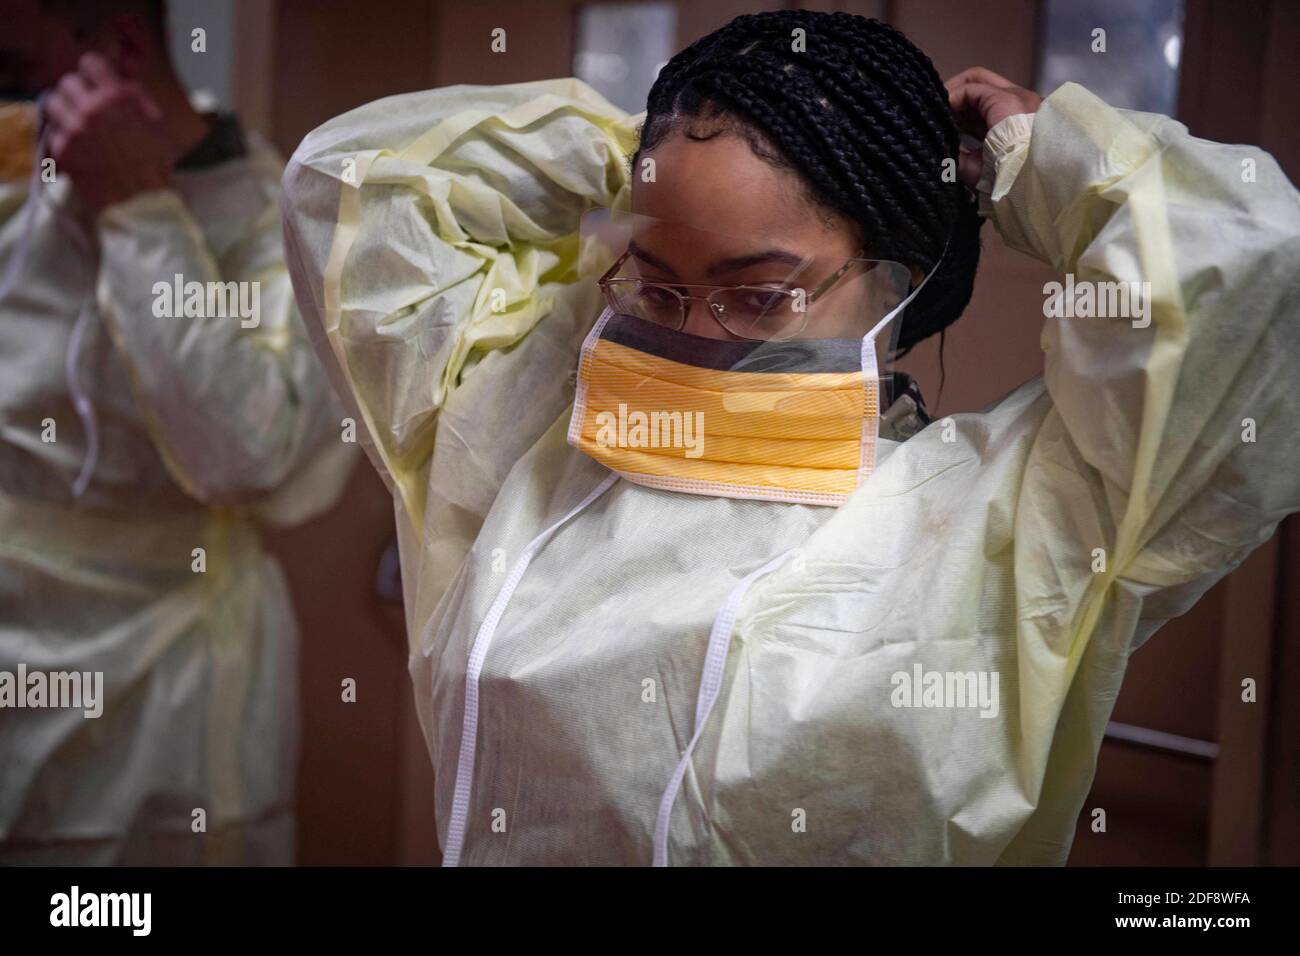 Handout file photo dated March 29, 2020) of Hospitalman Apprentice Kaylah Jenkins dons personal protective equipment during infection control training aboard the hospital ship USNS Comfort (T-AH 20) as the ship transits the Atlantic Ocean on its way to New York City in support of the nation’s COVID-19 response efforts. Photo by MC2 Sara Eshleman/US Navy via ABACAPRESS.COM Stock Photo